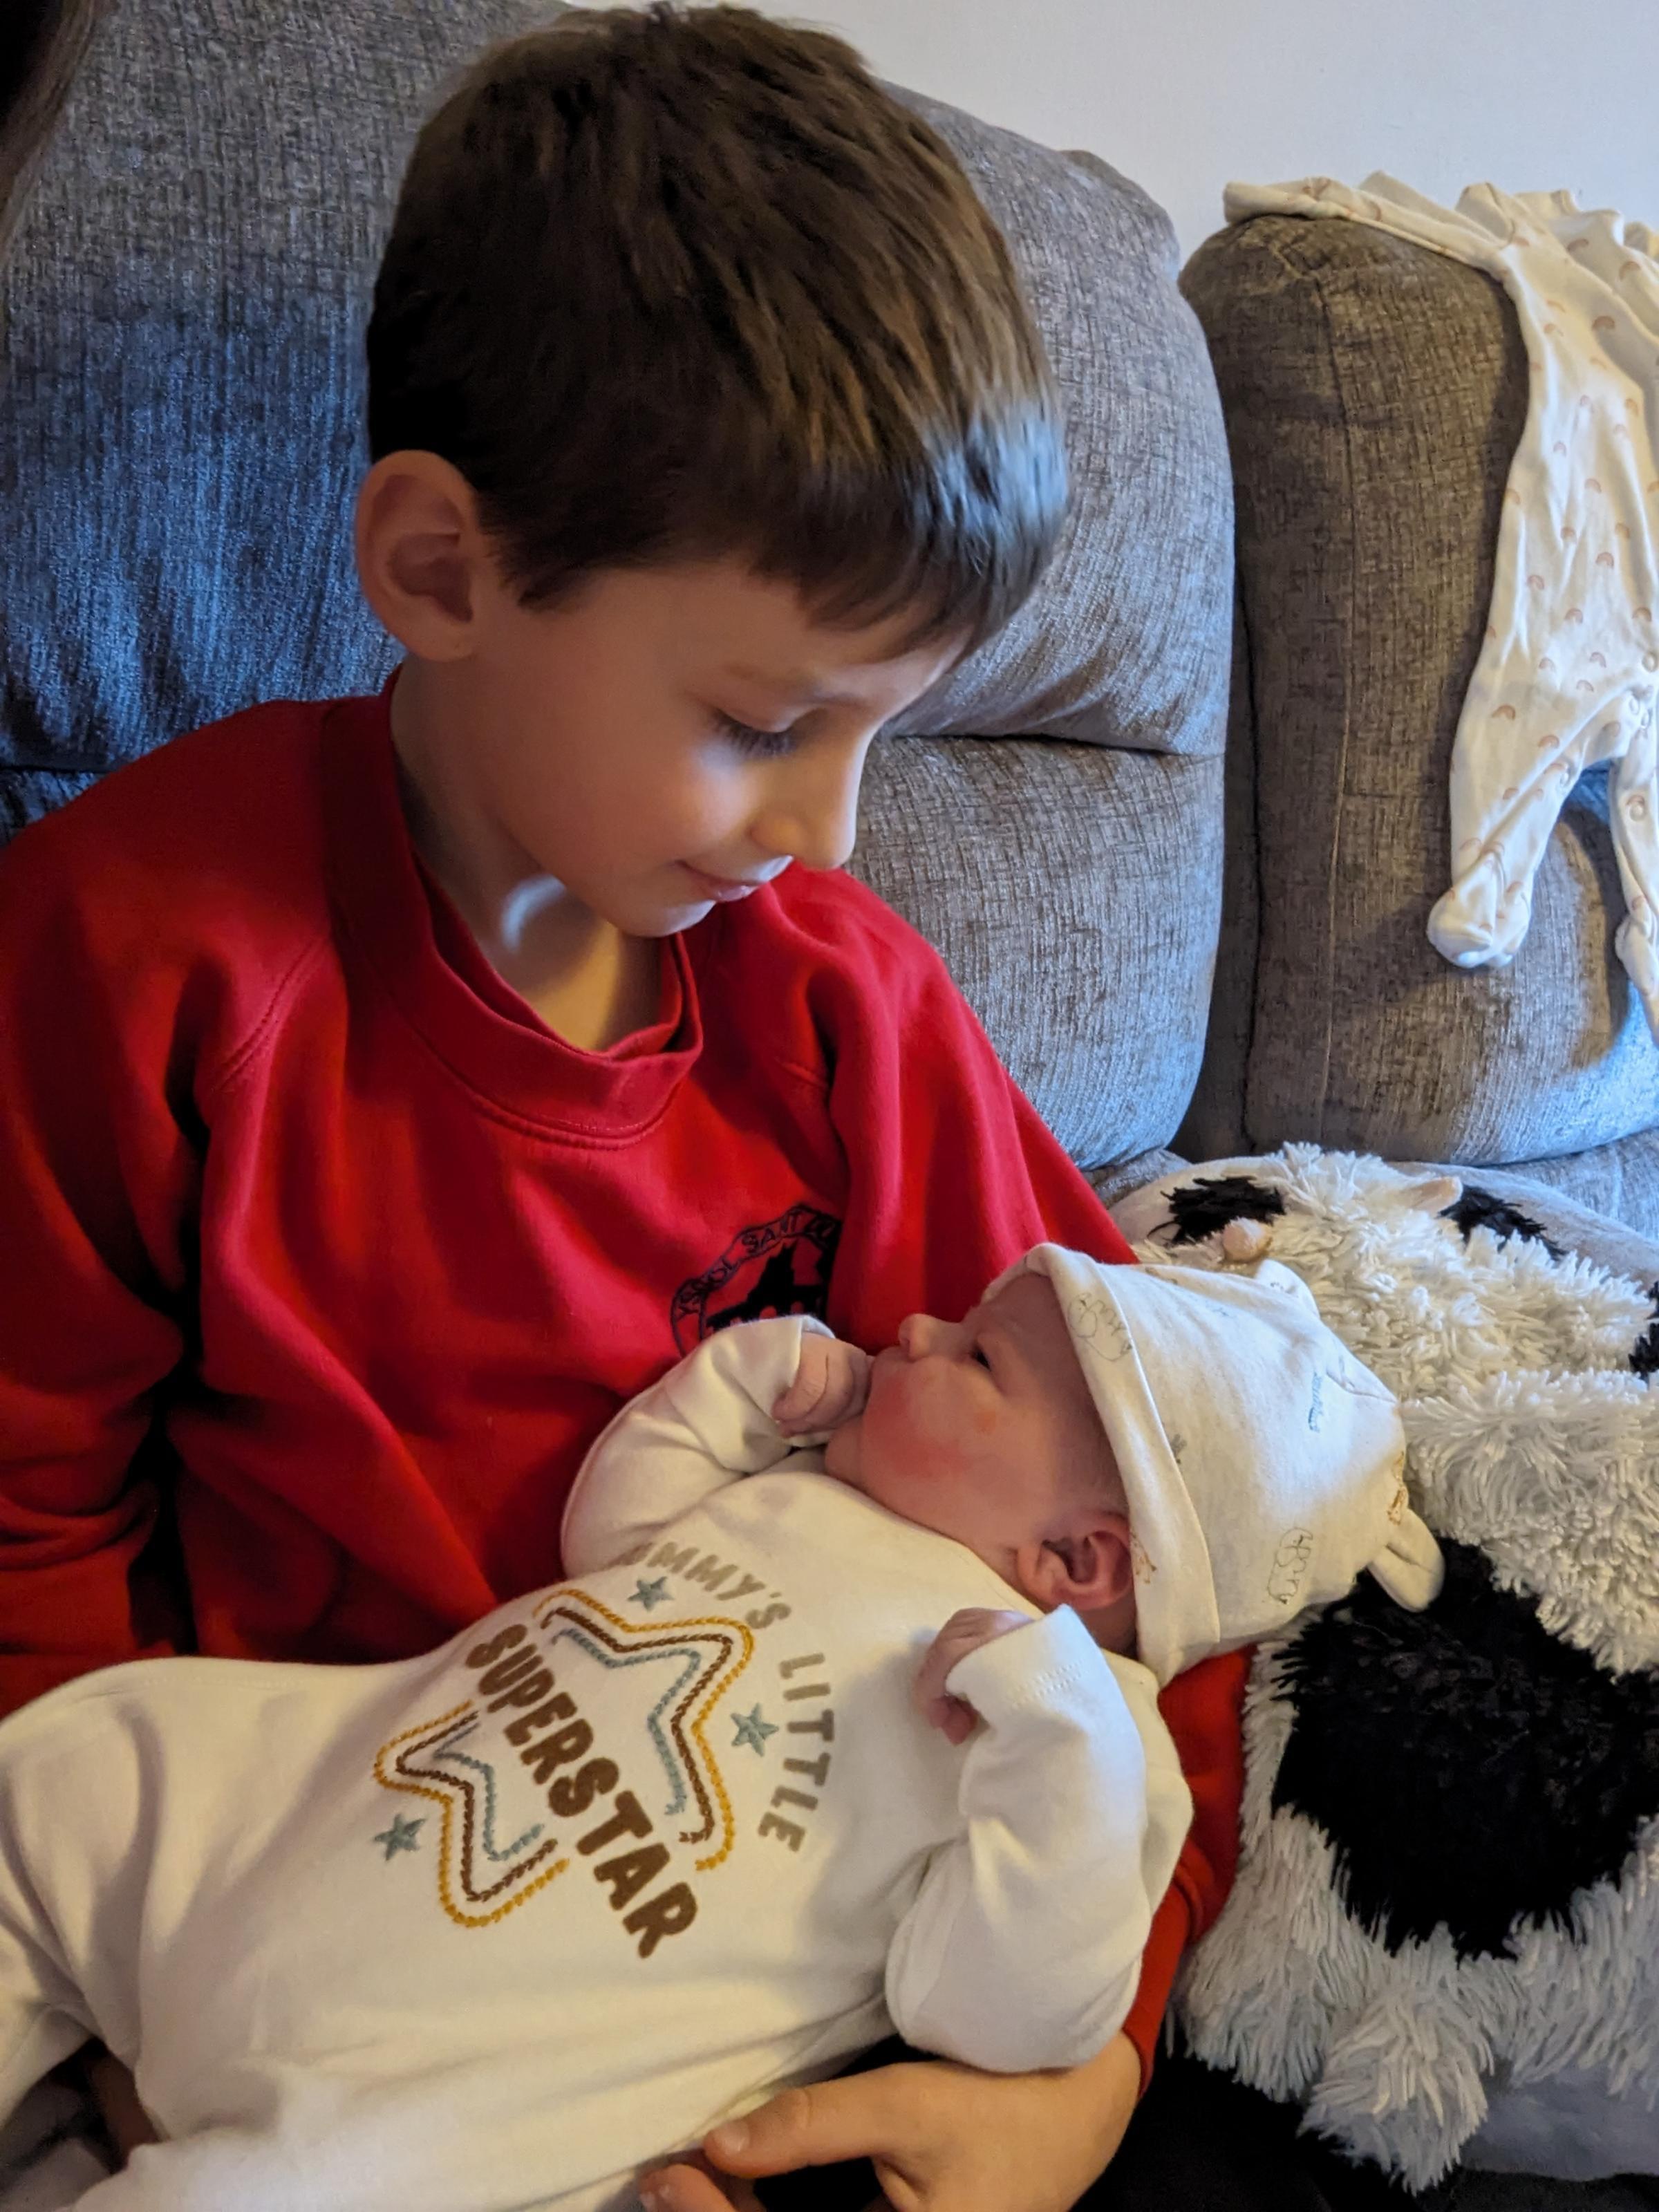 Big brother Oliver came home from school to a long anticipated sister.